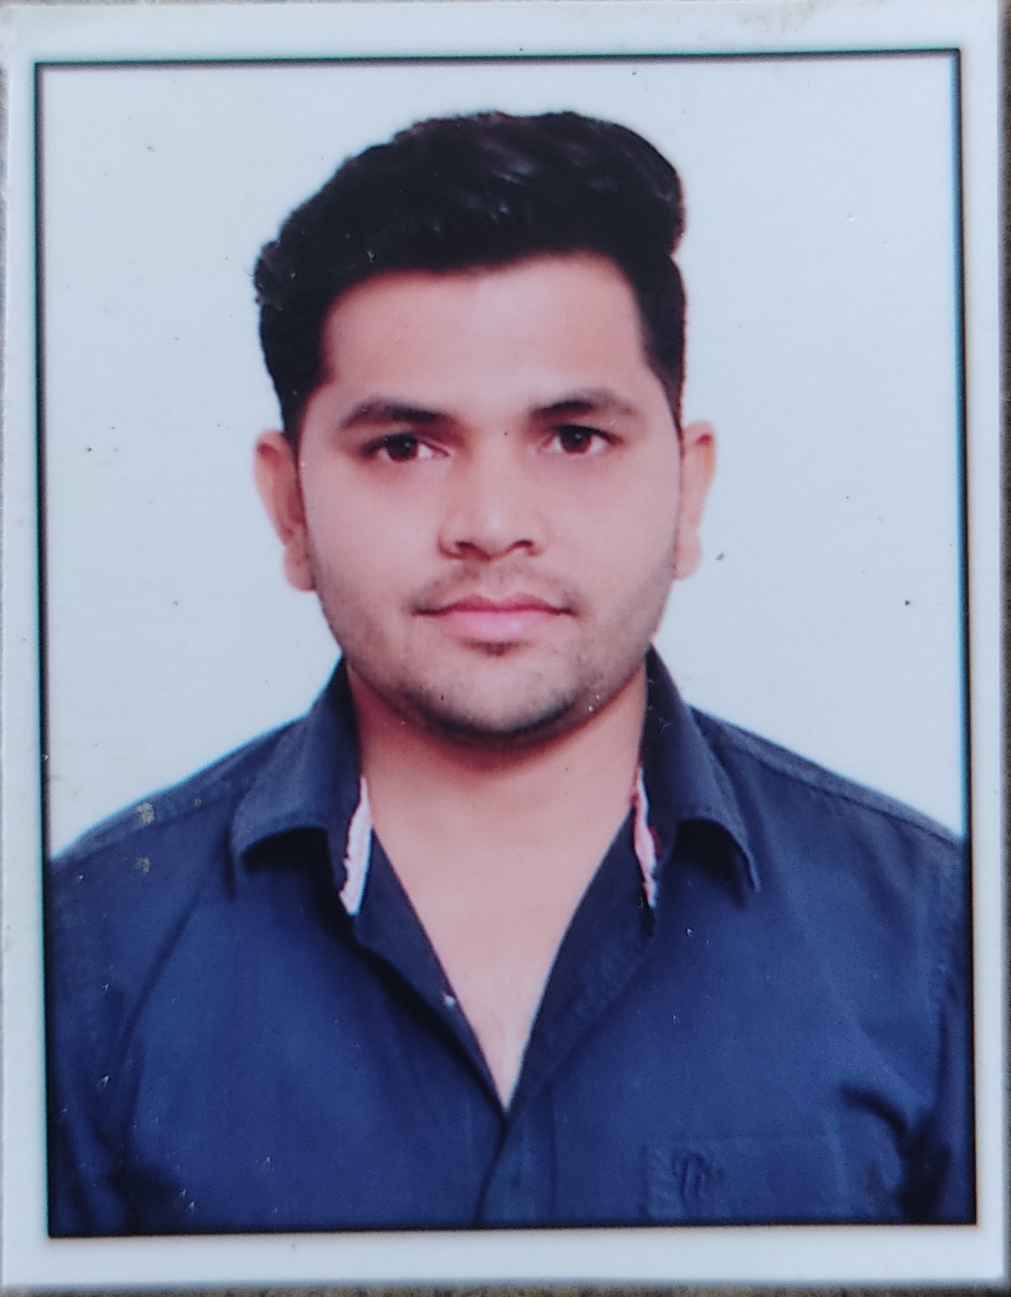 Placed candidate of 4Achievers - AMIT KUMAR